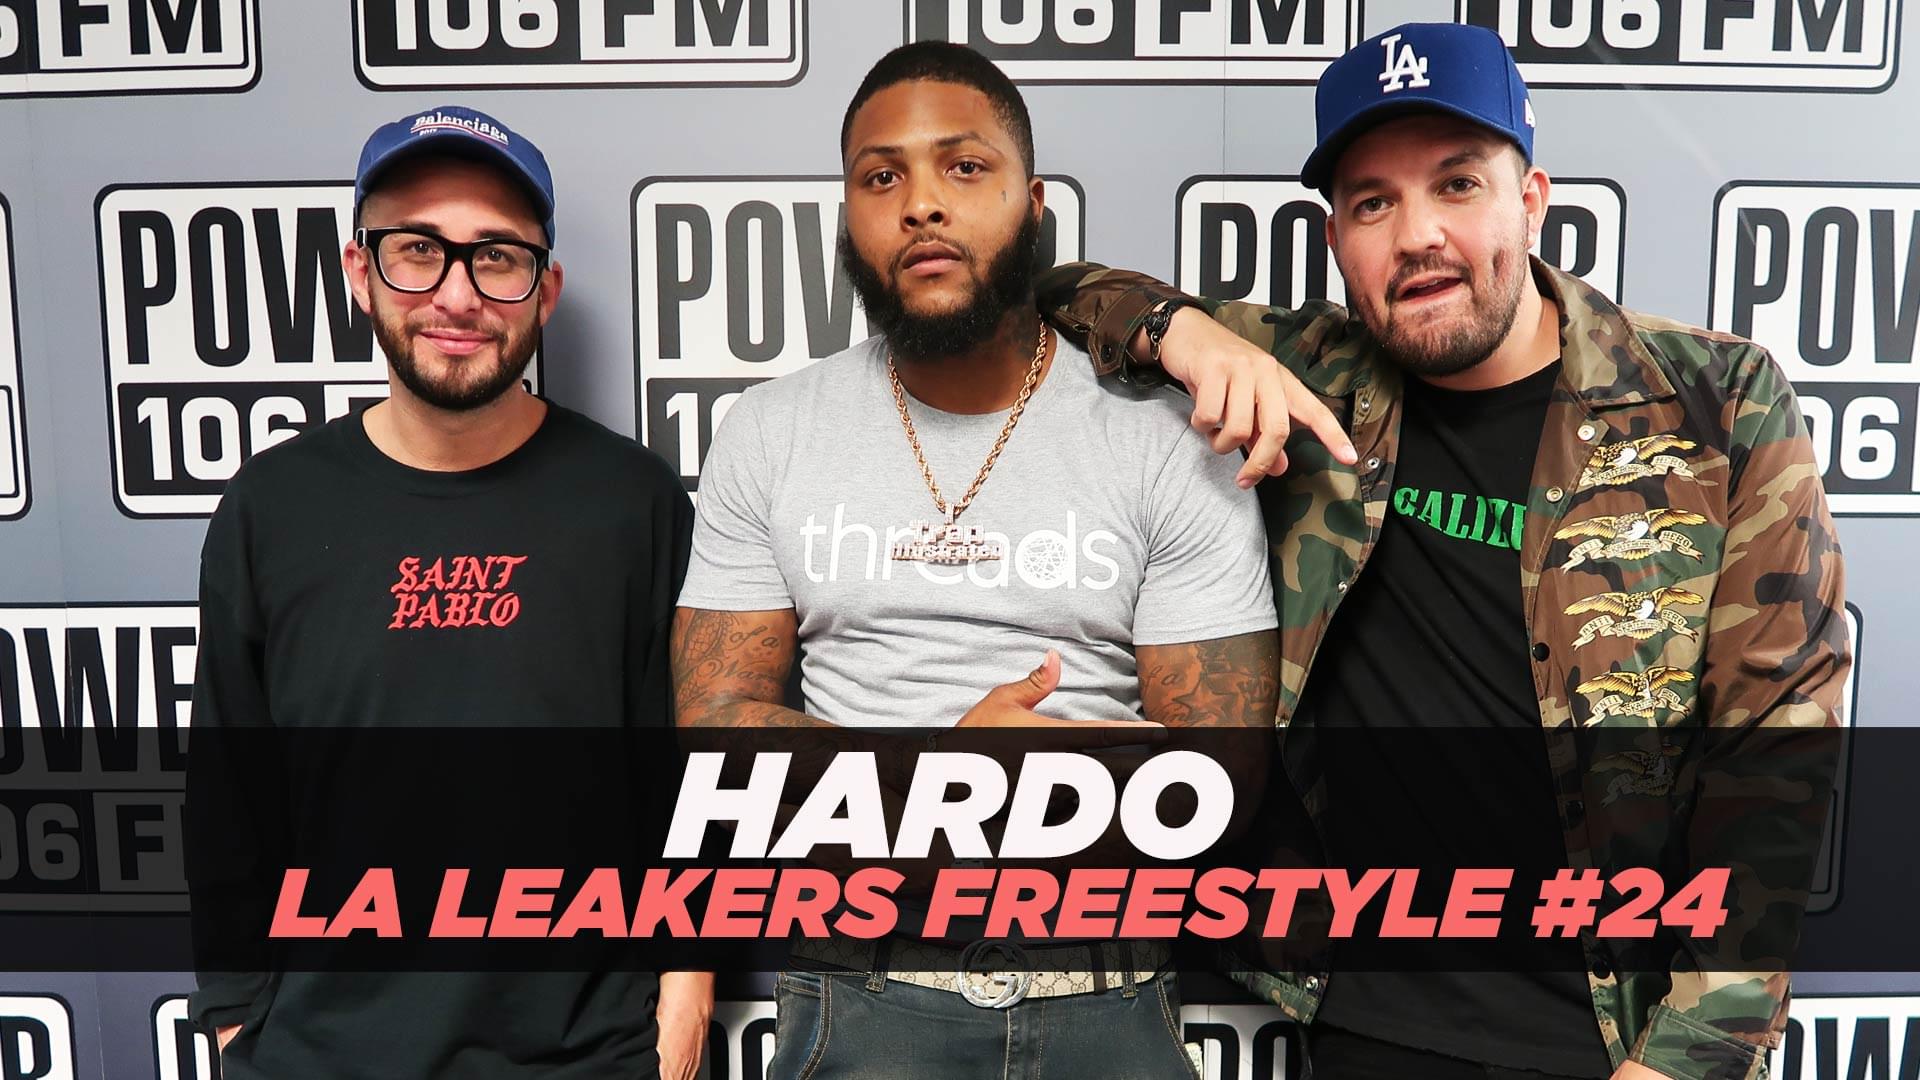 Hardo Stops By The Liftoff To Deliver A Fire Freestyle With Justin Credible And Dj SourMilk